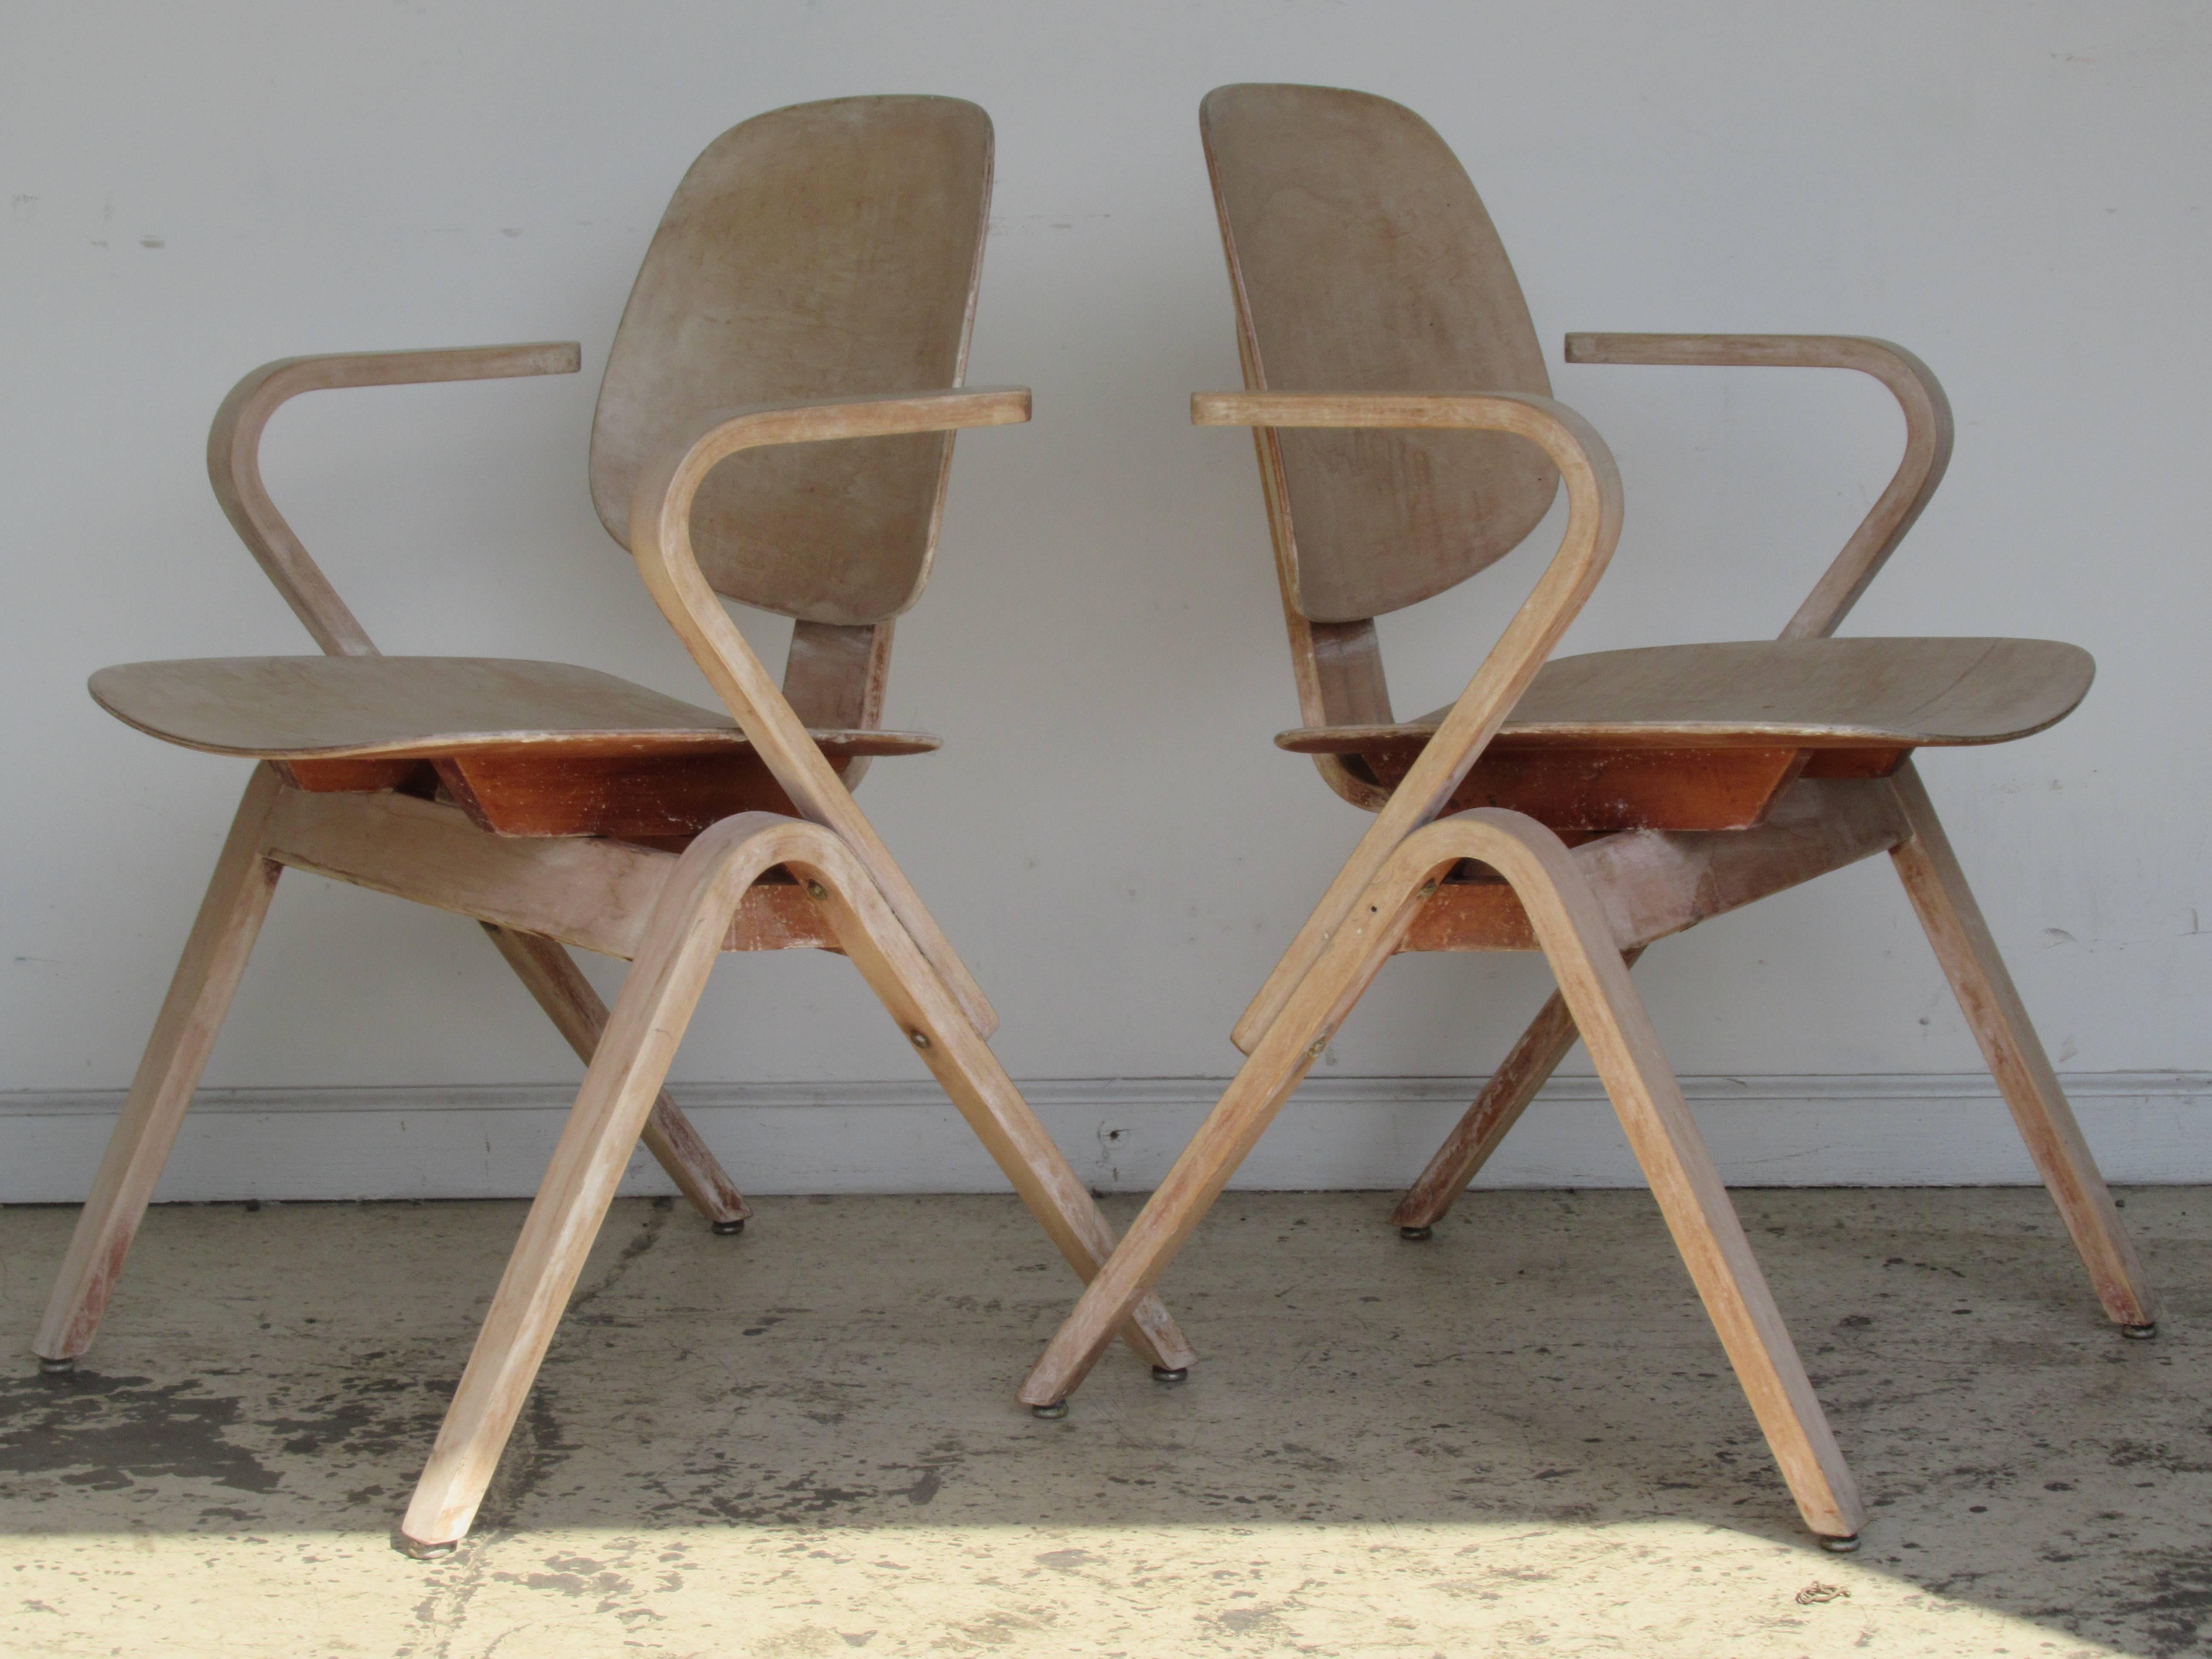 Great looking pair of bent plywood streamlined modernist armchairs designed by Joe Atkinson for Thonet in a stripped and bleached surface color. Circa 1950. Look at all pictures and read condition report in comment section.